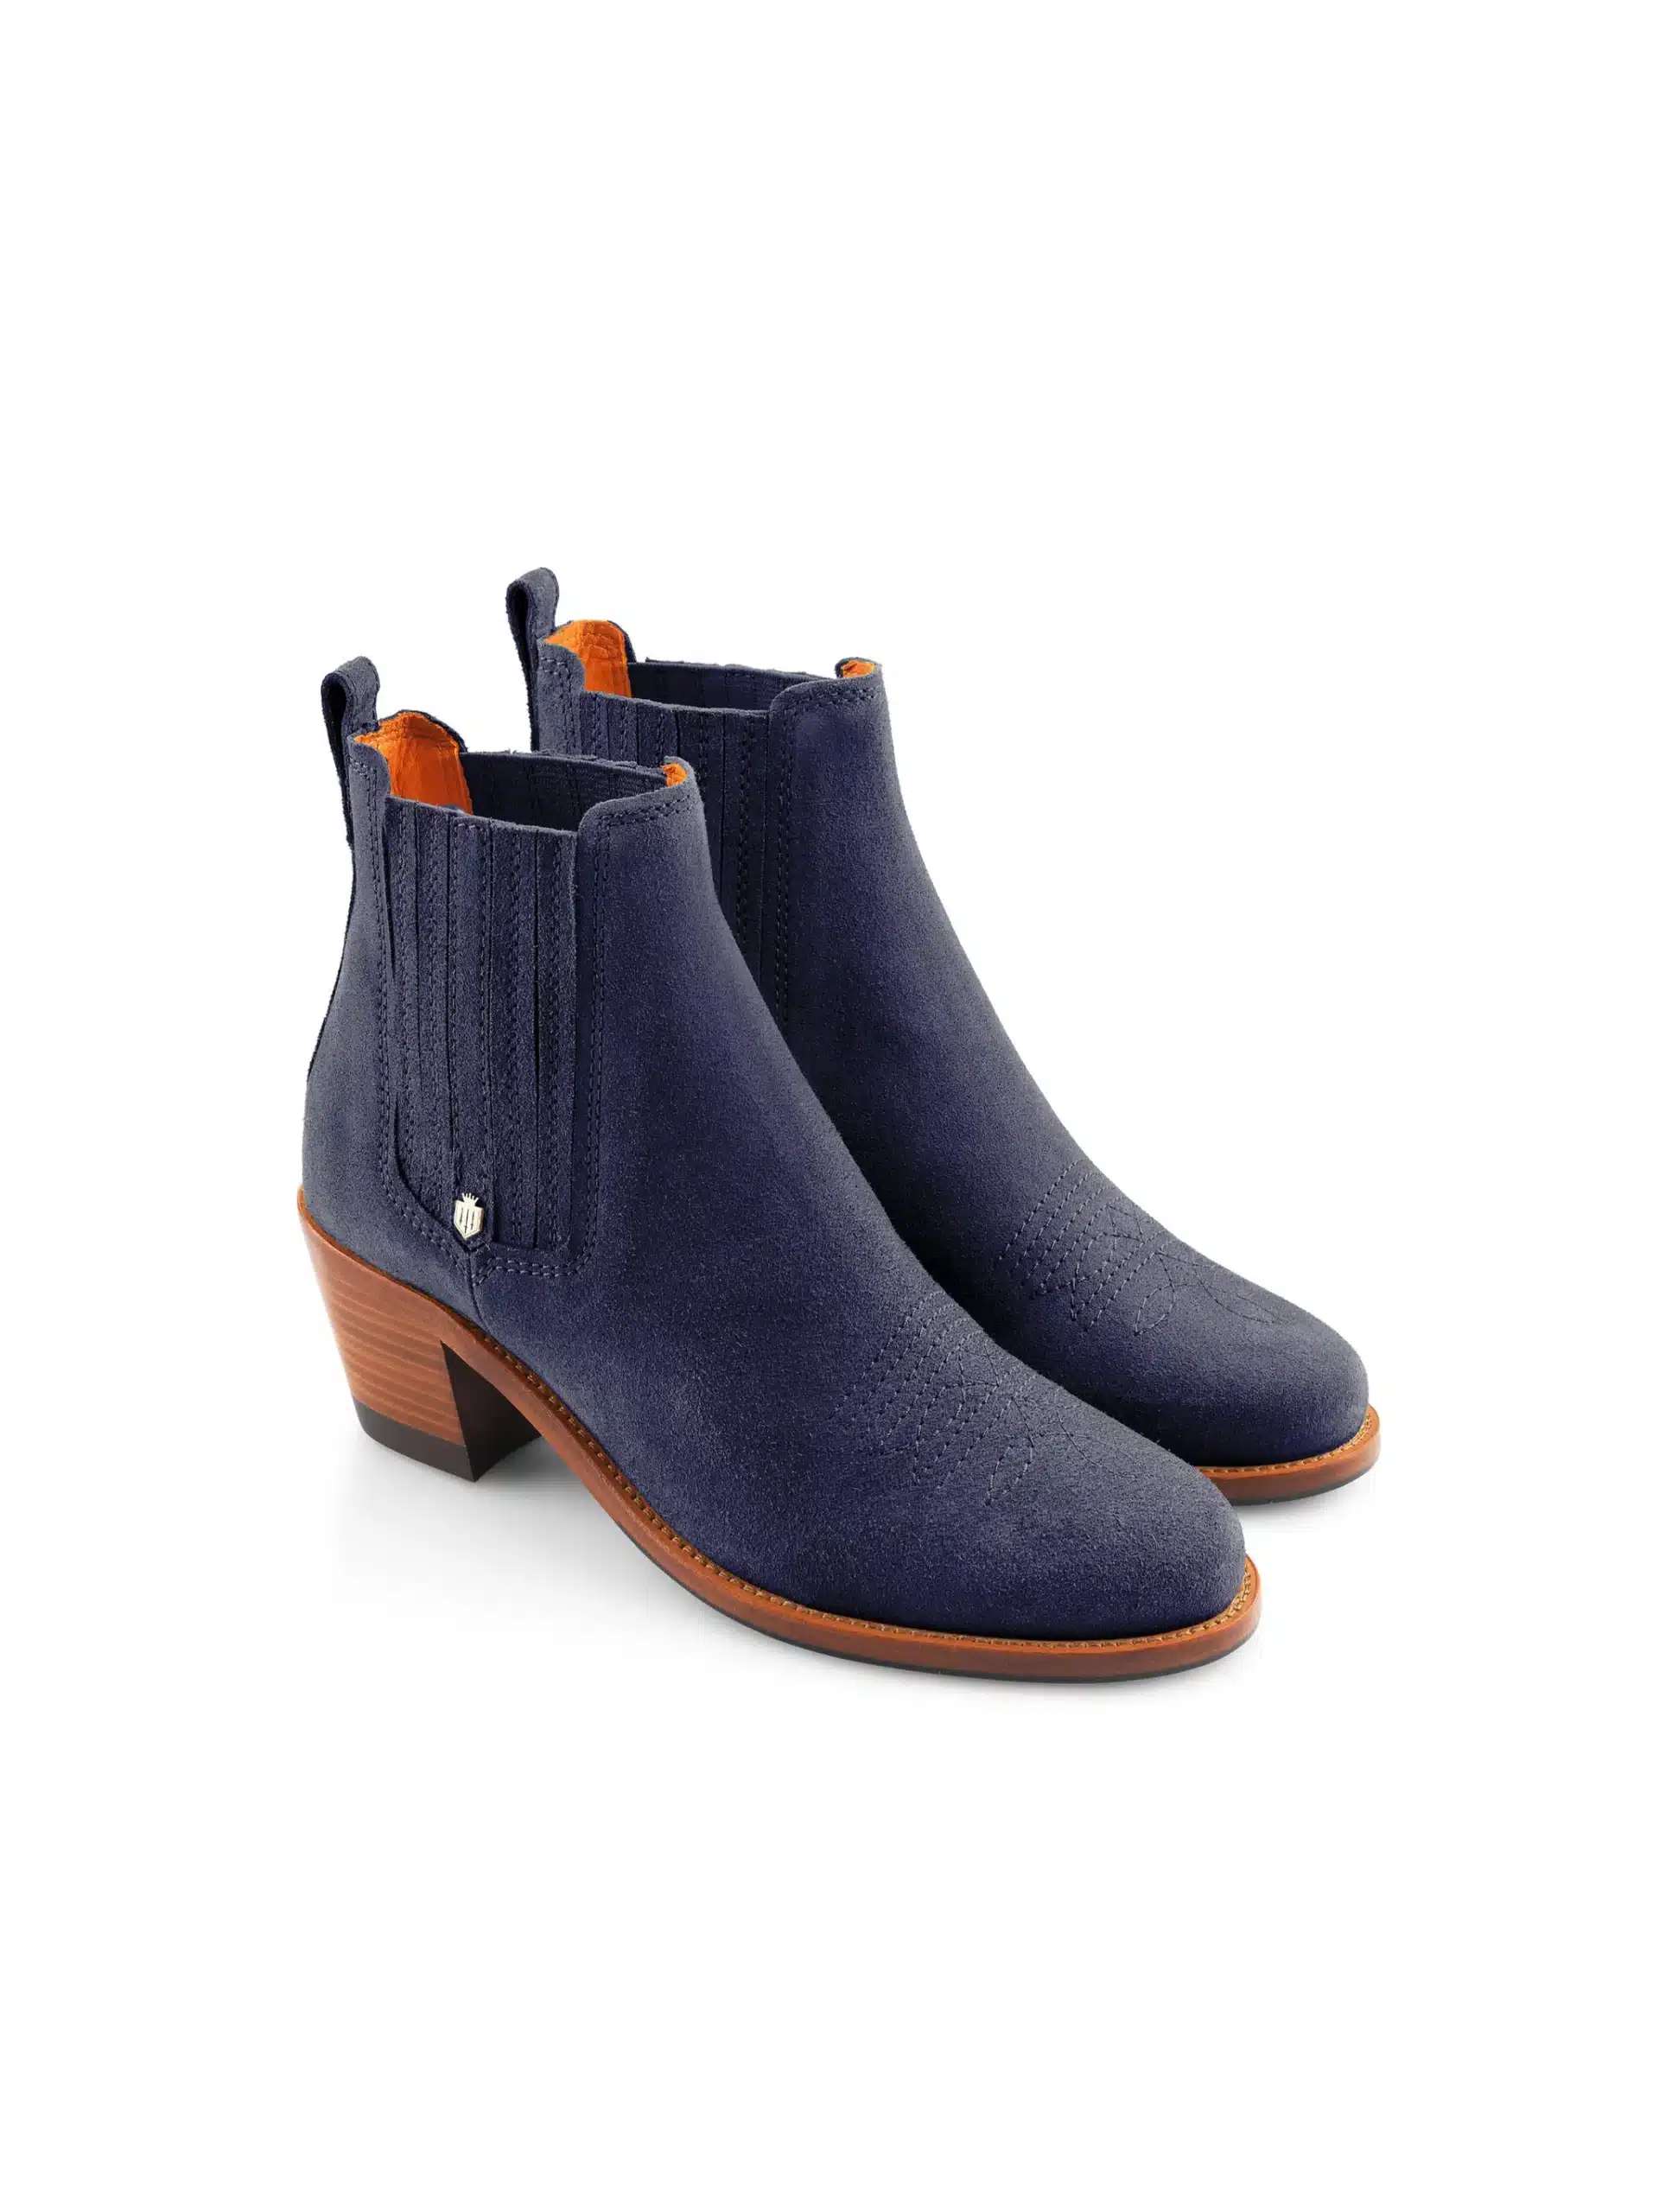 The Rockingham Heeled Ankle Boot – Ink Suede